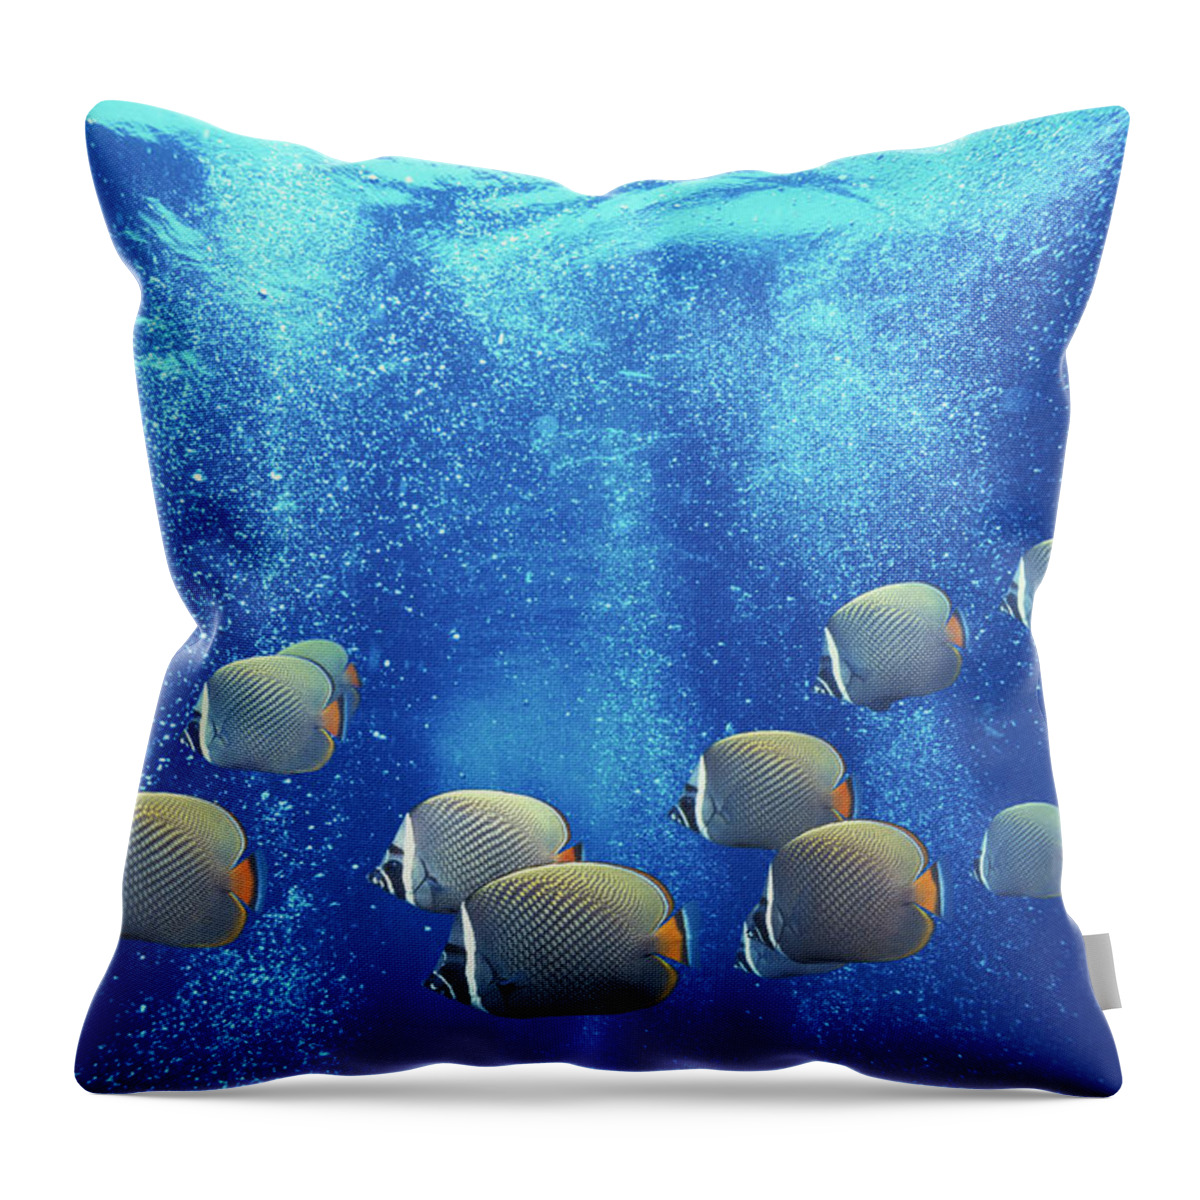 Underwater Throw Pillow featuring the photograph School Of Redtail Butterflyfish by Georgette Douwma